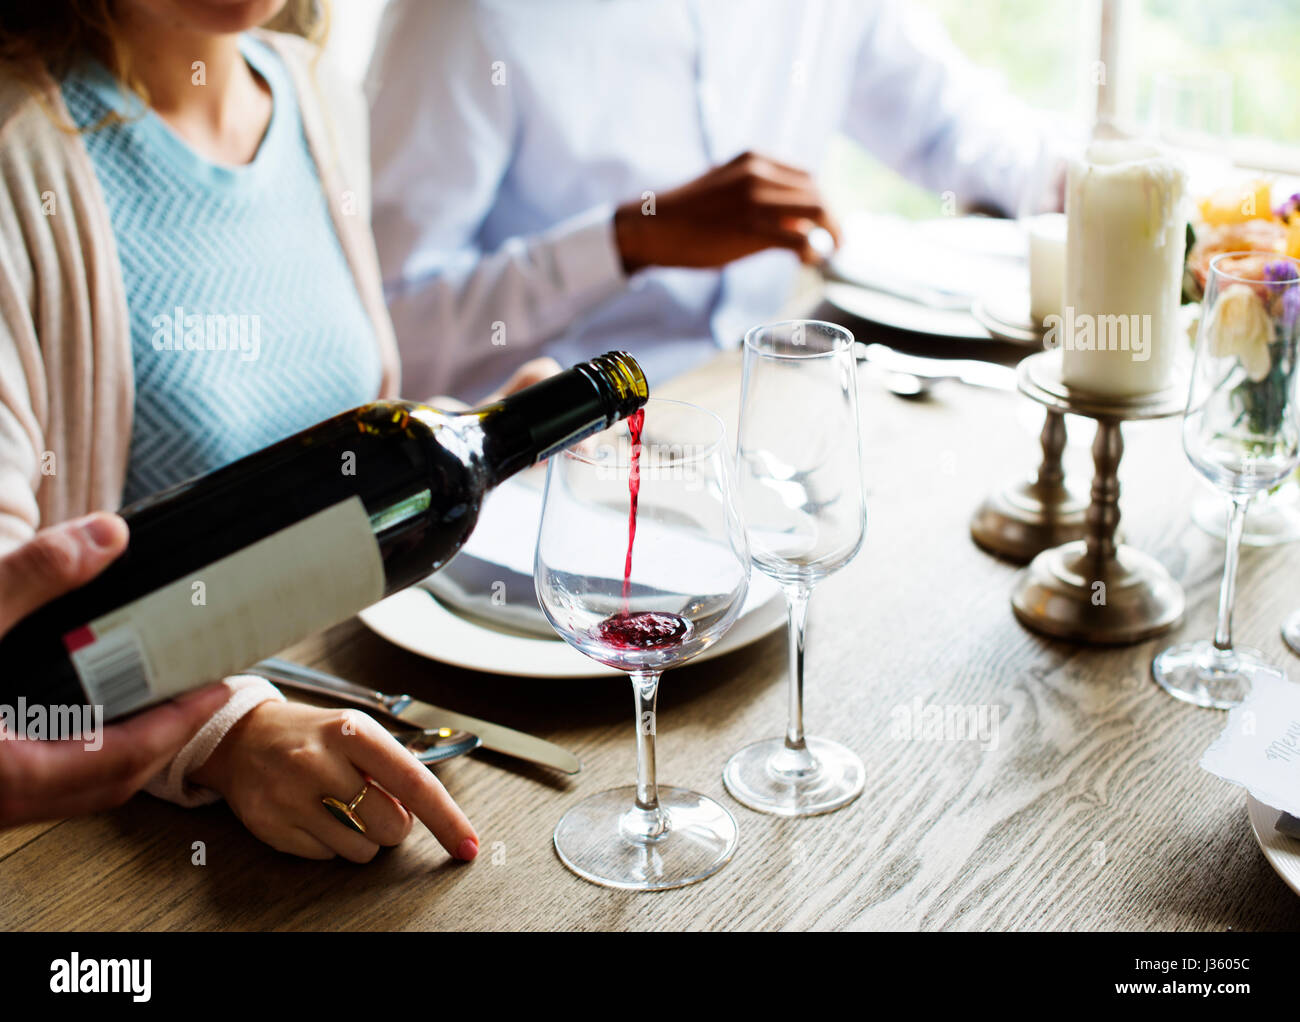 Waiter Poring Serving Red Wine to Customers in a Restaurant Stock Photo